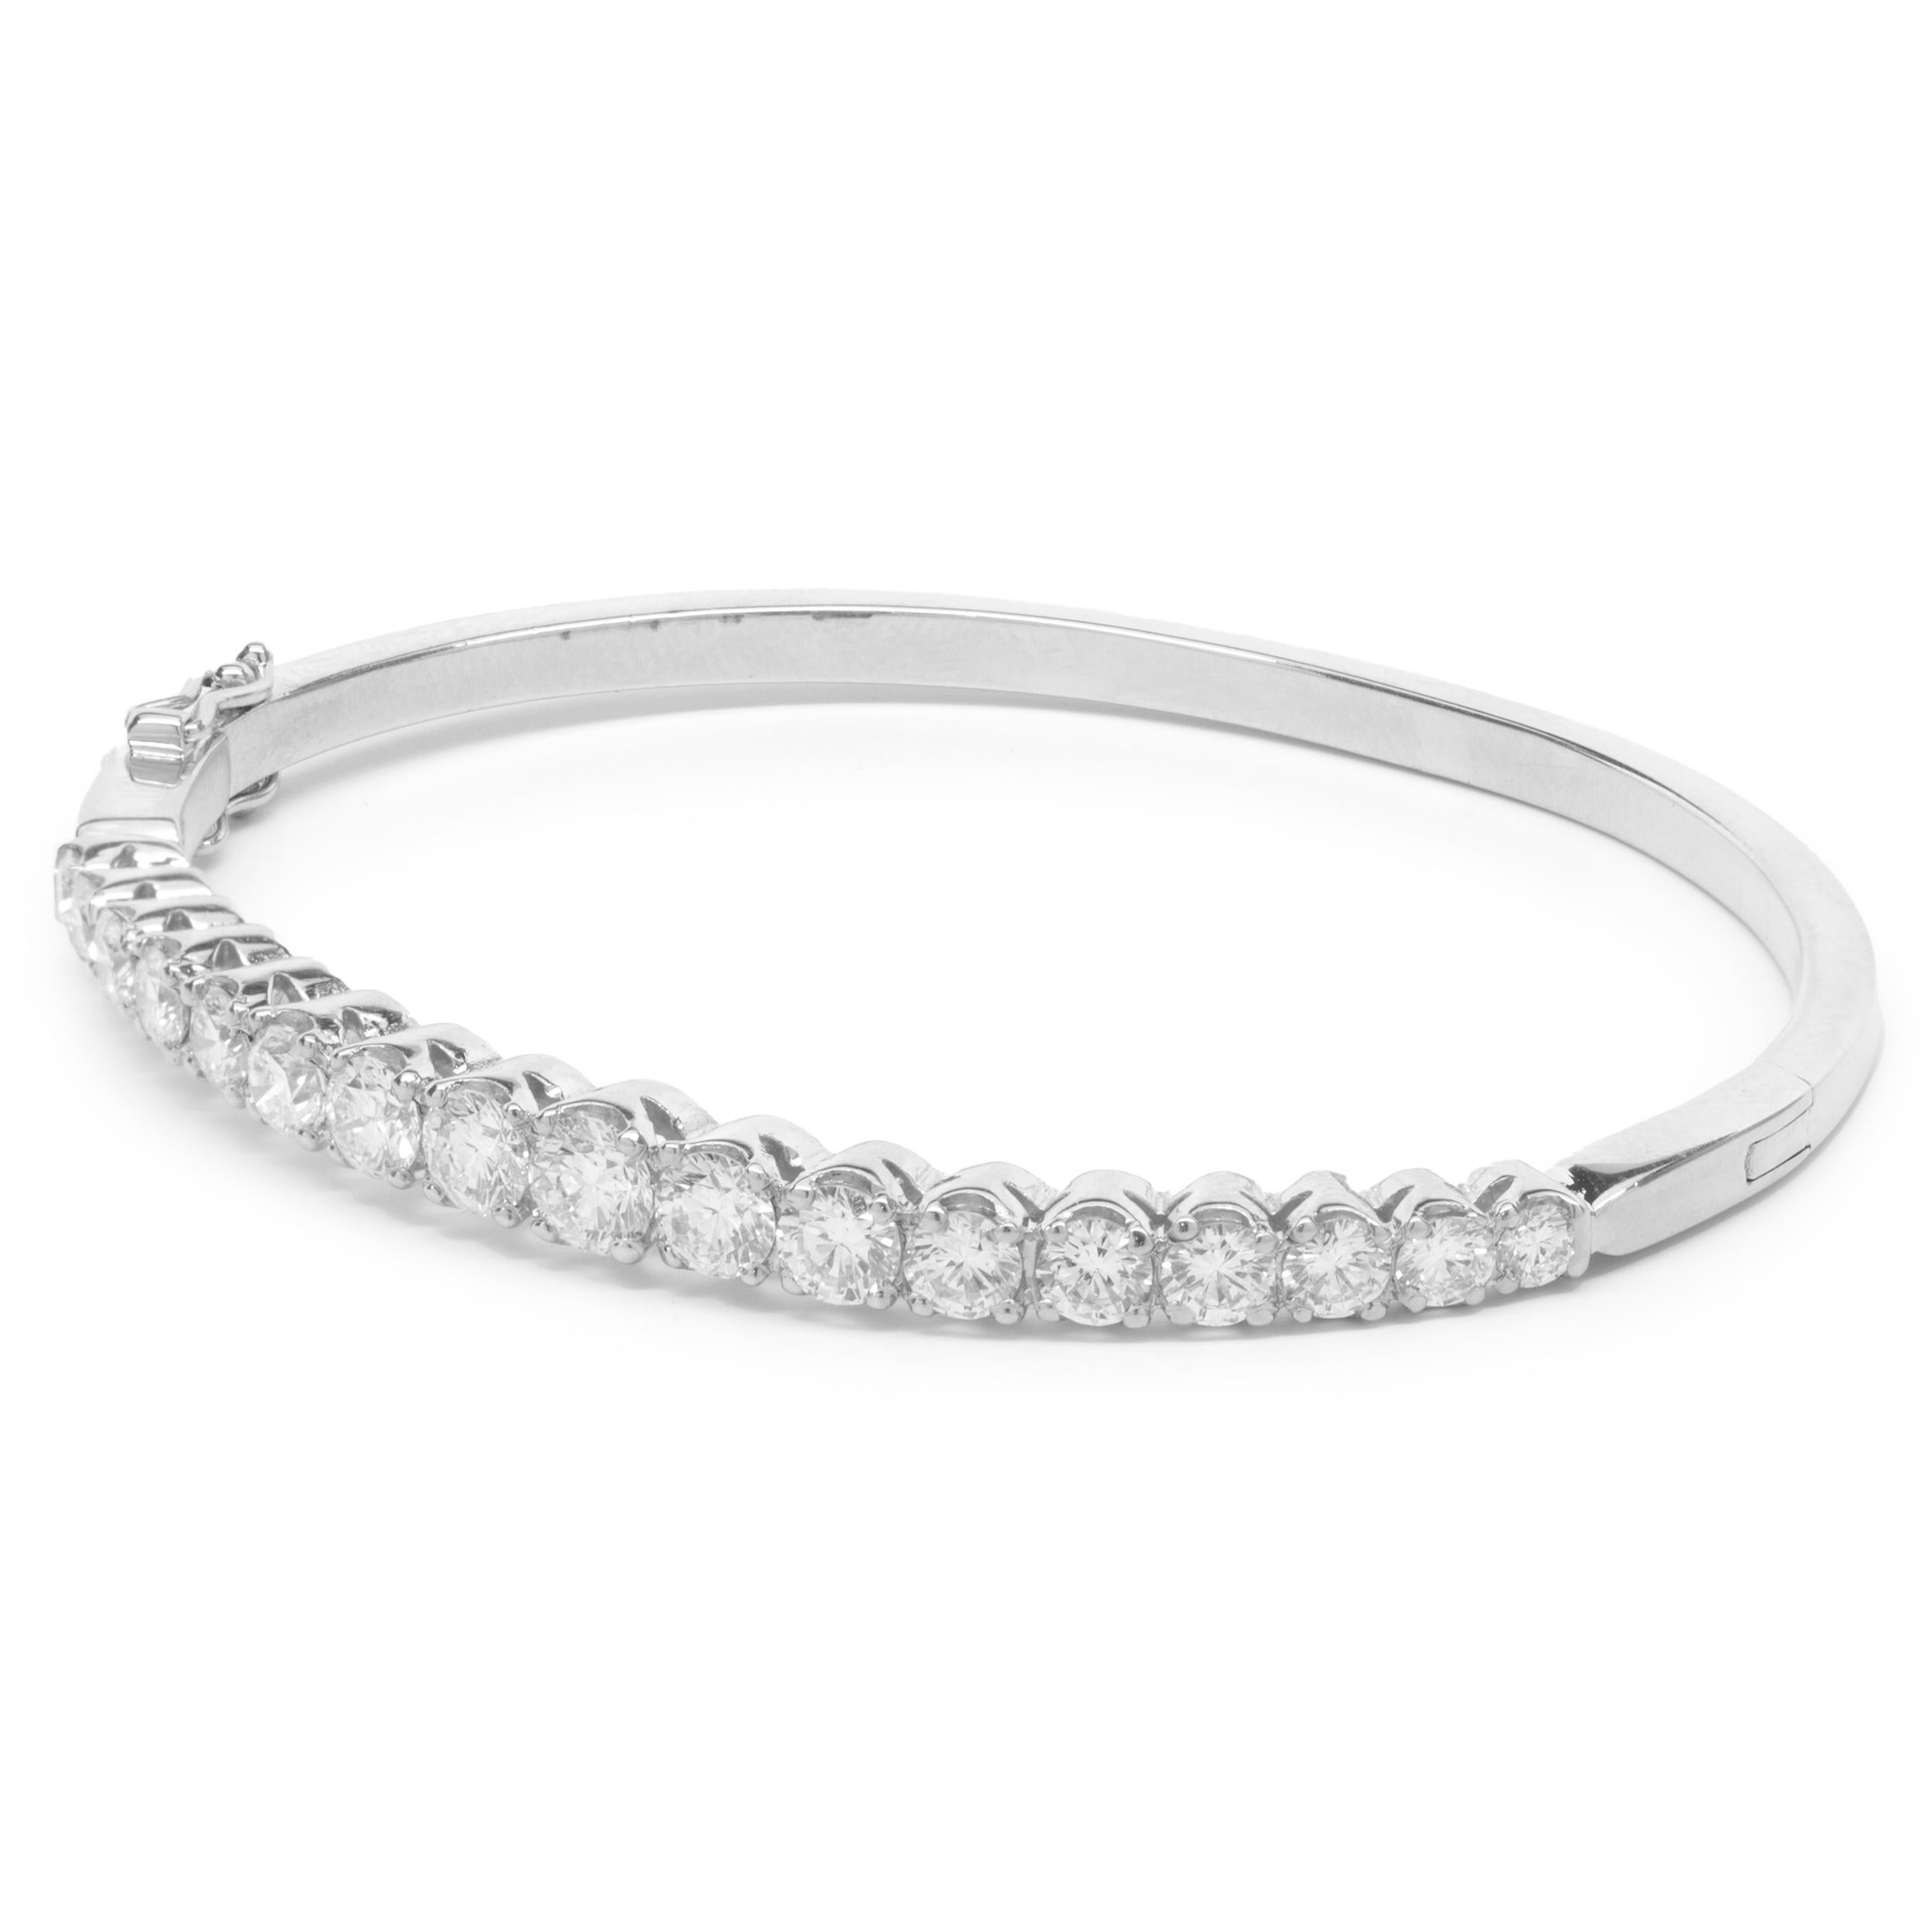 Designer: custom designed 
Material: 18K white gold
Diamonds: 23 round brilliant cut = 5.00cttw
Color: H/I
Clarity: VS2
Dimensions: bracelet will fit a 8-inch wrist 
Weight:  18.56 grams
